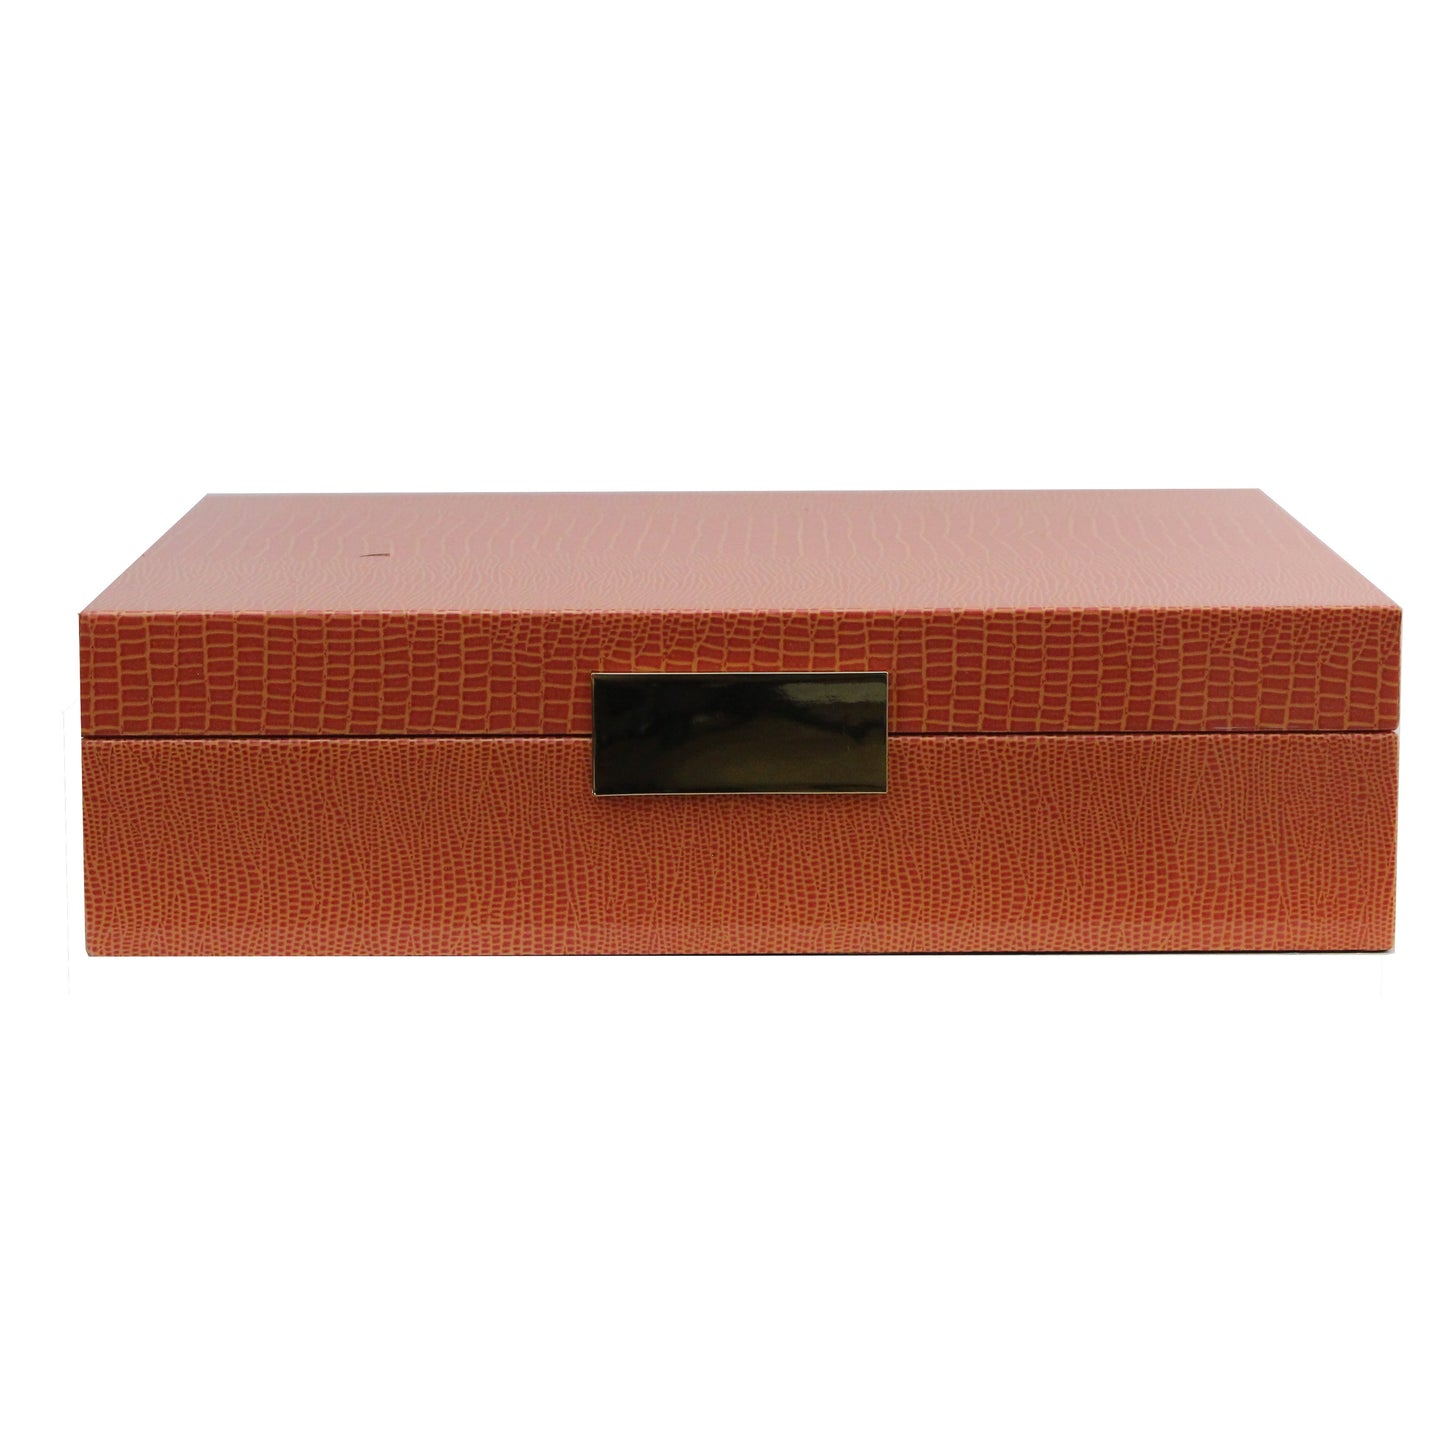 Large orange storage box with gold plated clasp